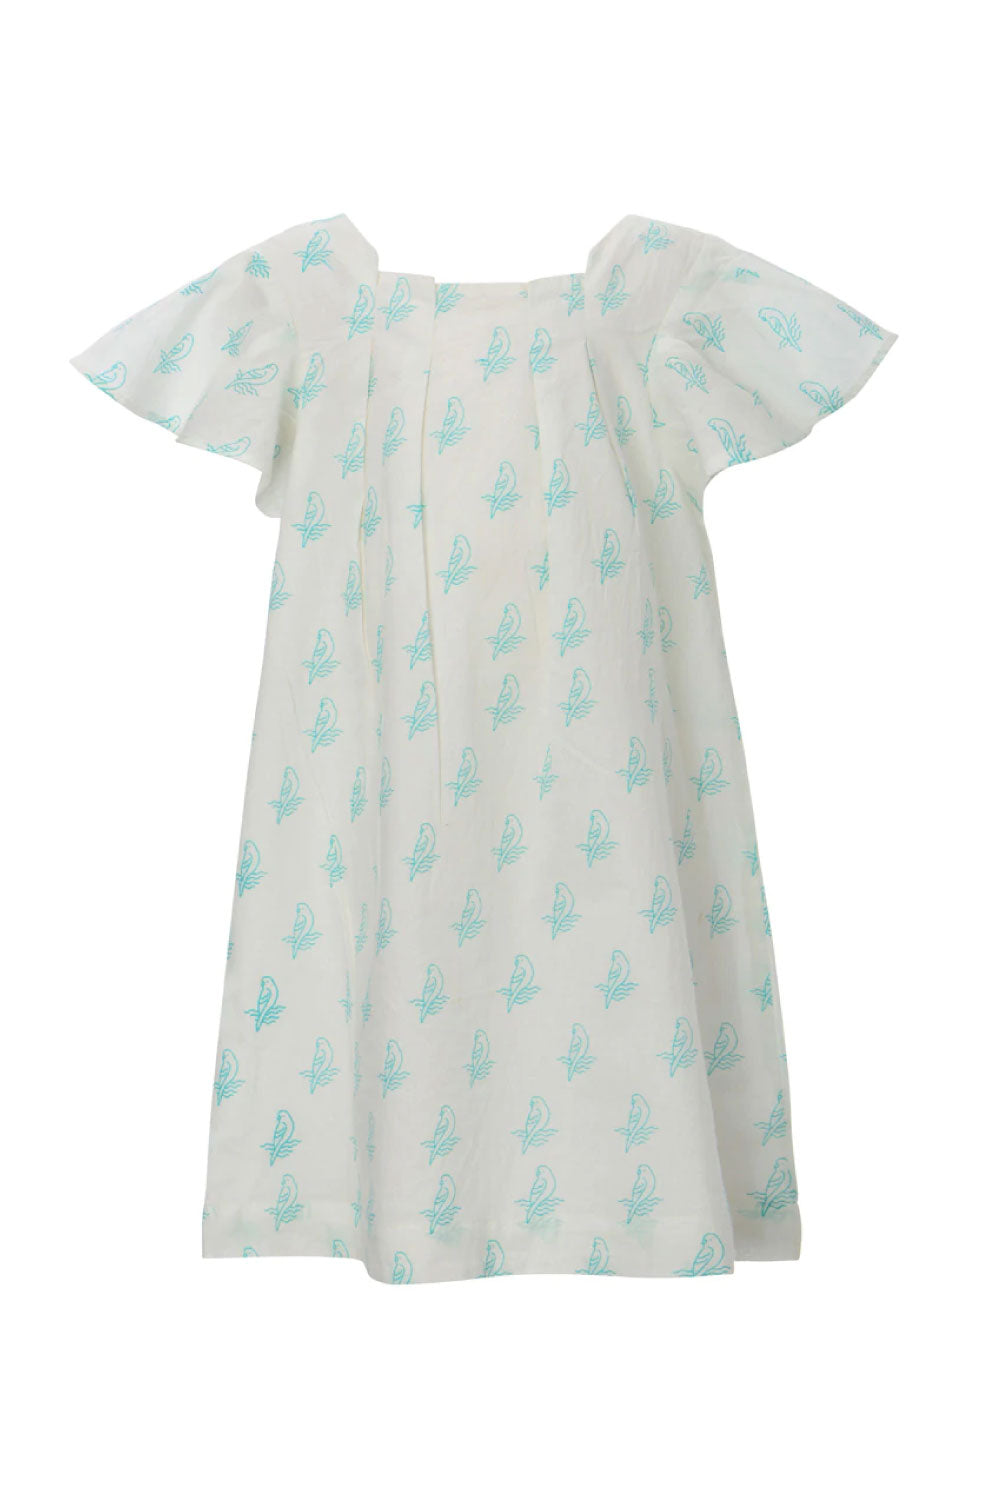 Image of the front of the Alice Parrot Dress in Turquoise.